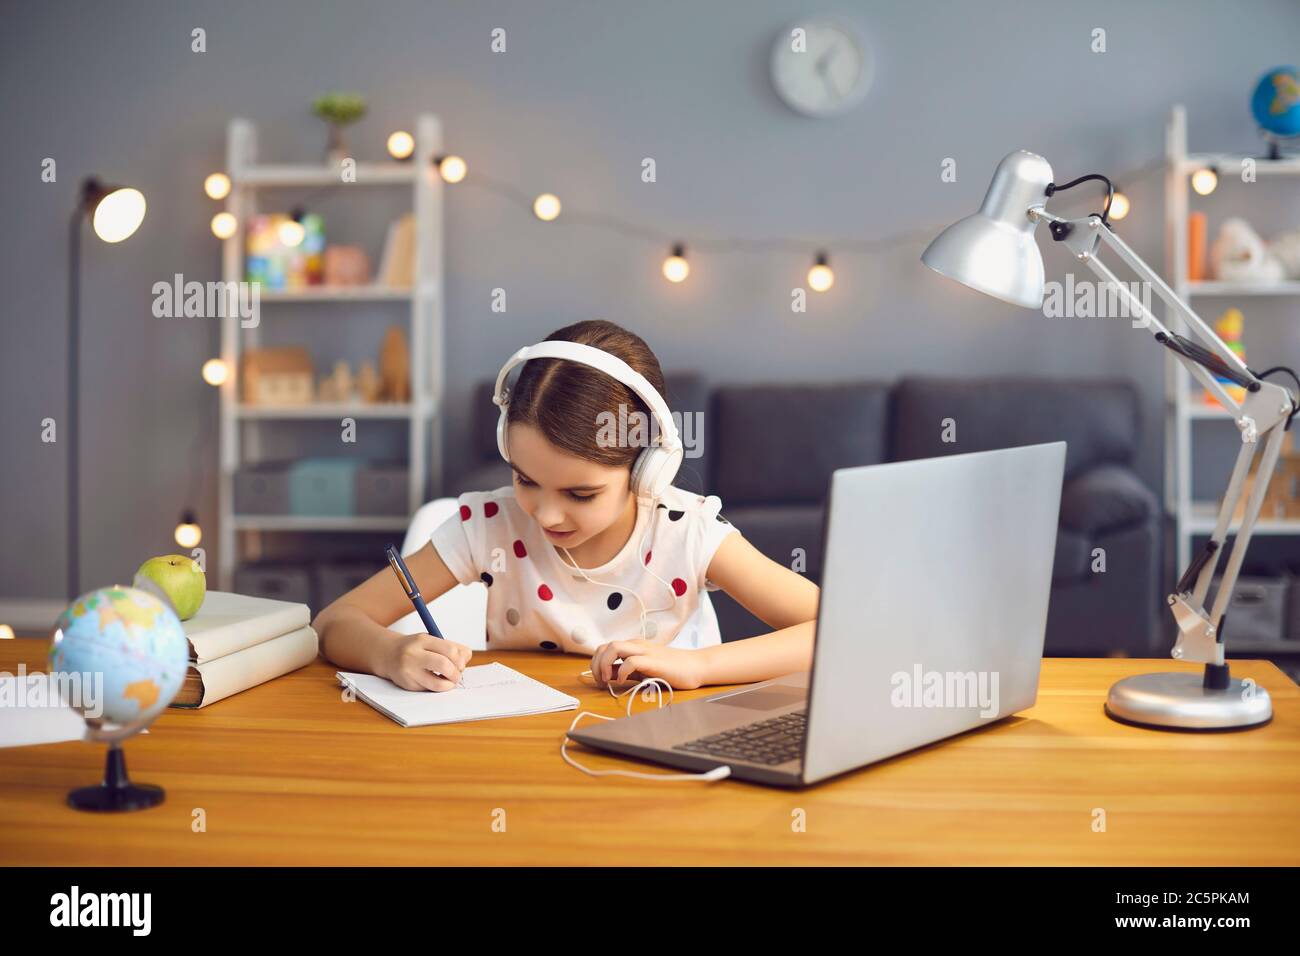 Serious little girl with headphones and laptop studying online at home, writing down notes in her copybook Stock Photo